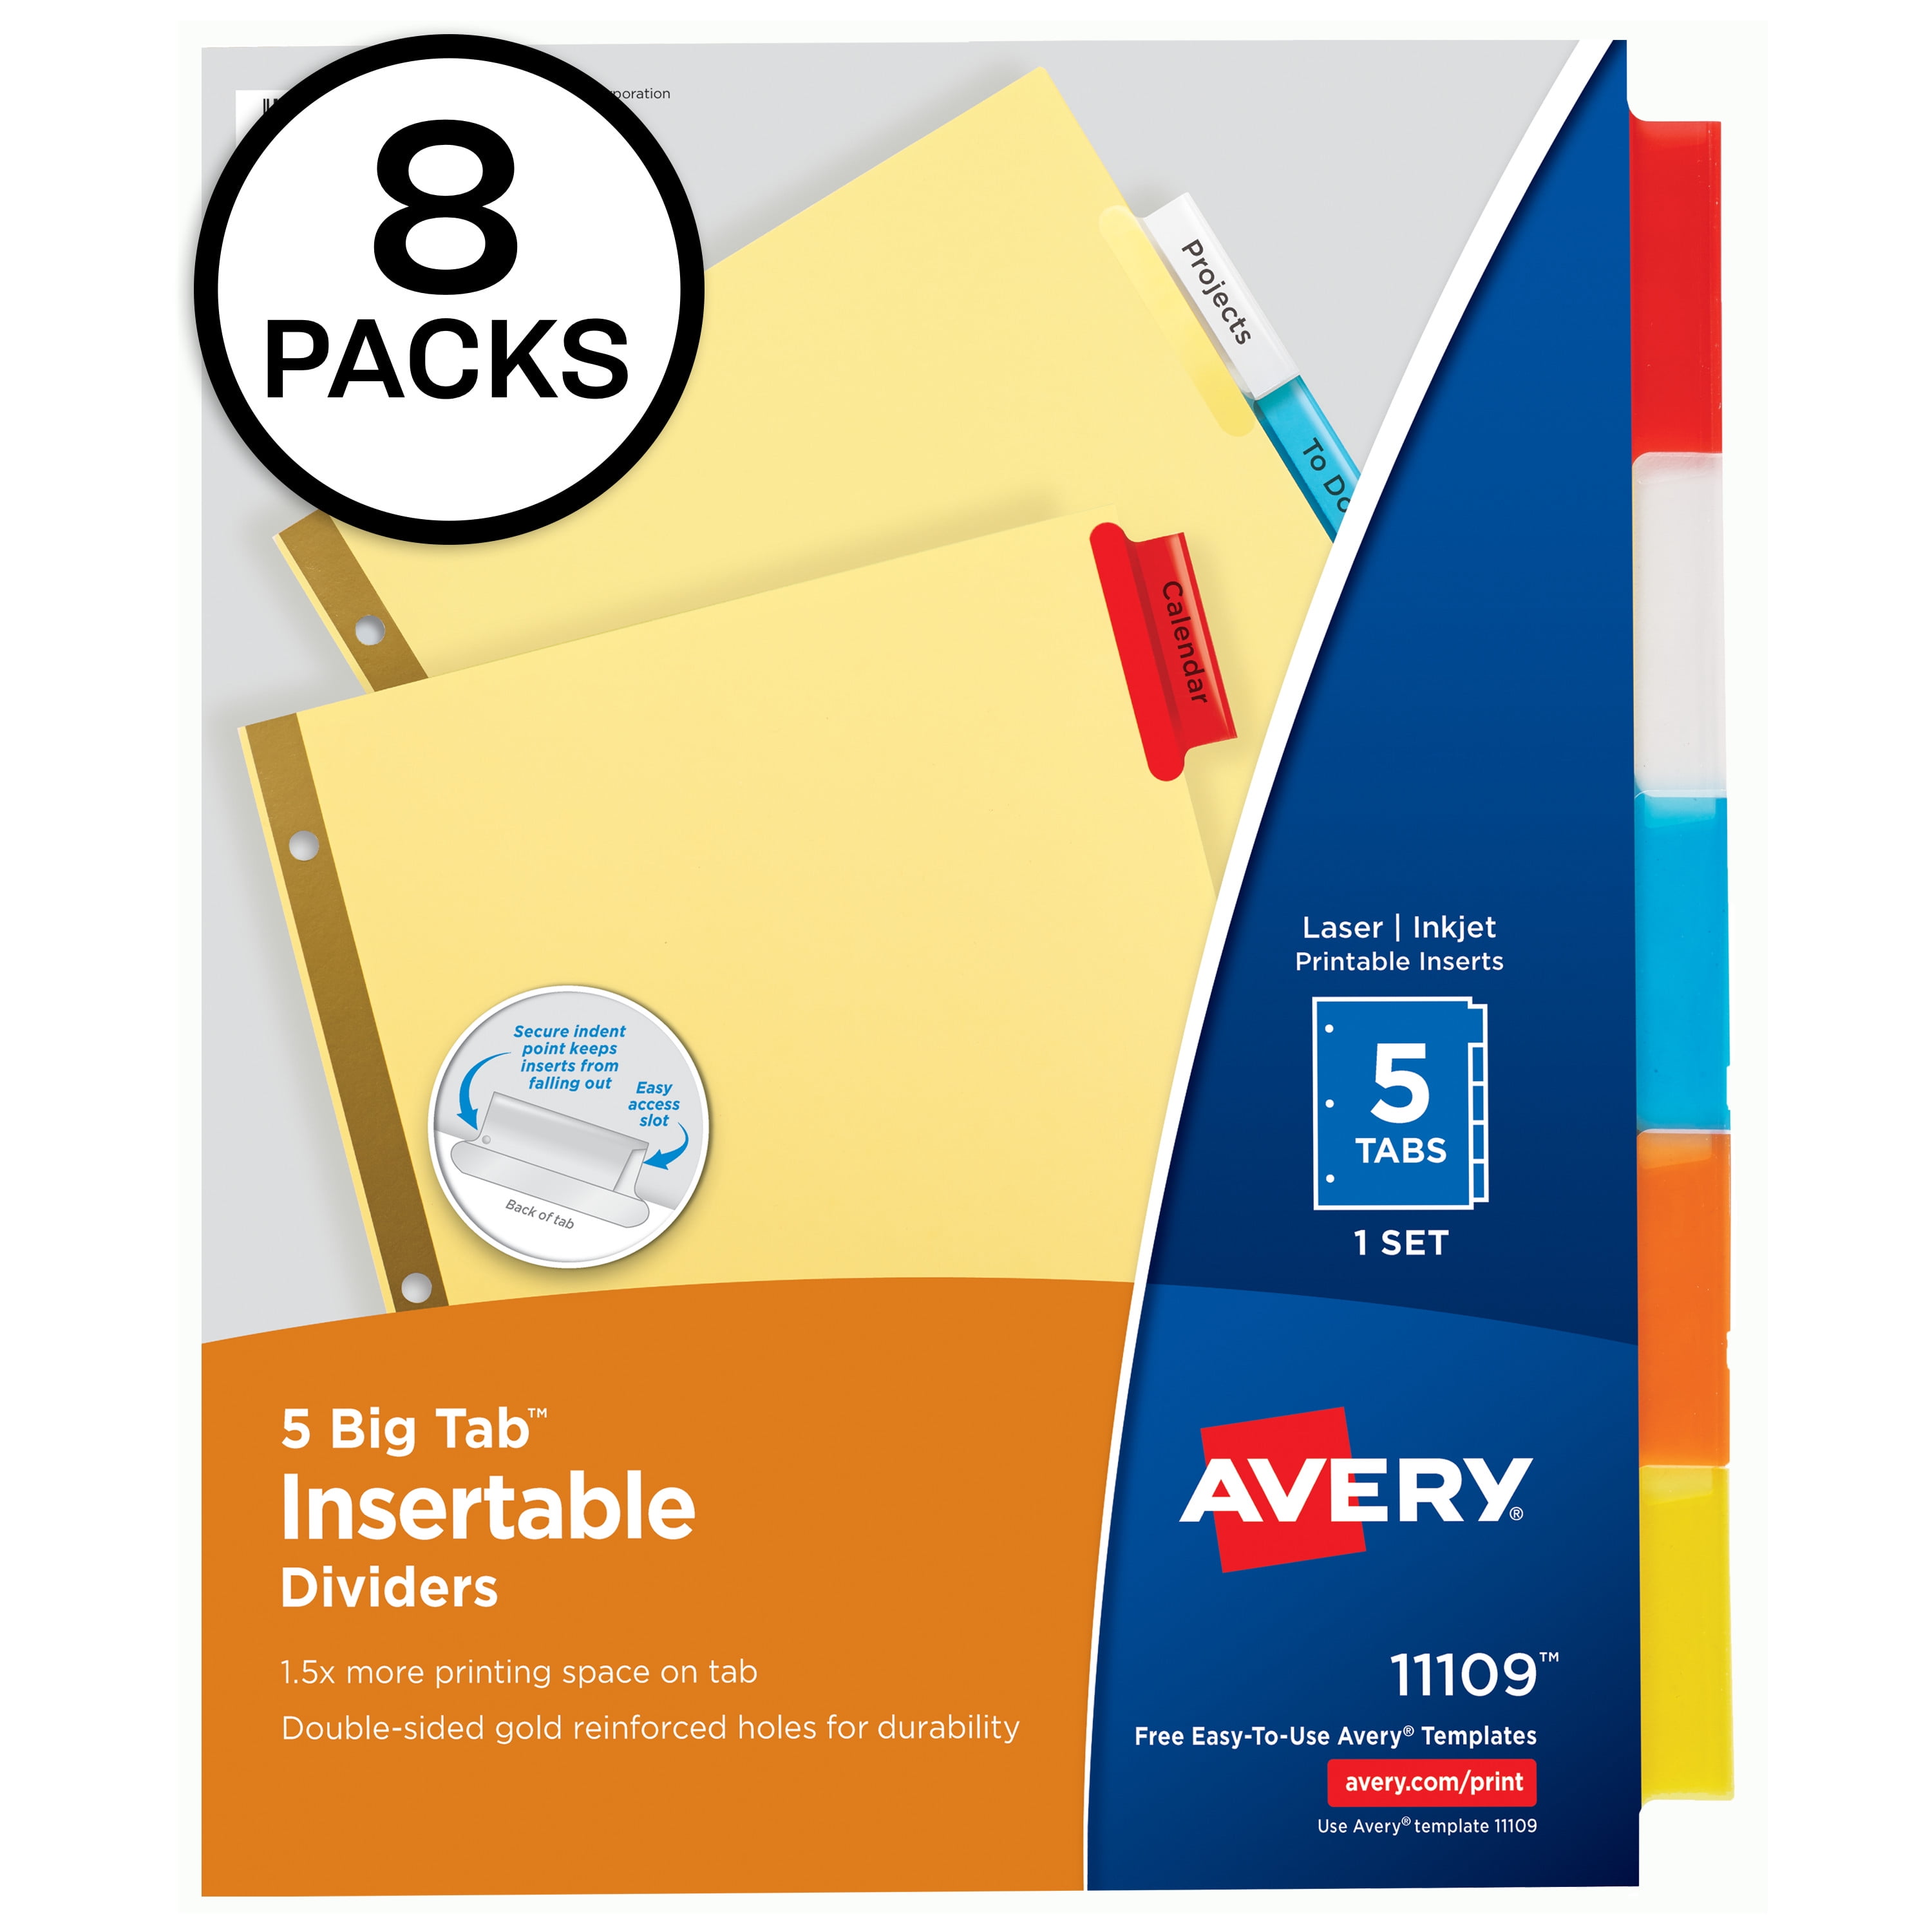 avery-5-tab-dividers-insertable-multicolor-big-tabs-8-sets-of-11109